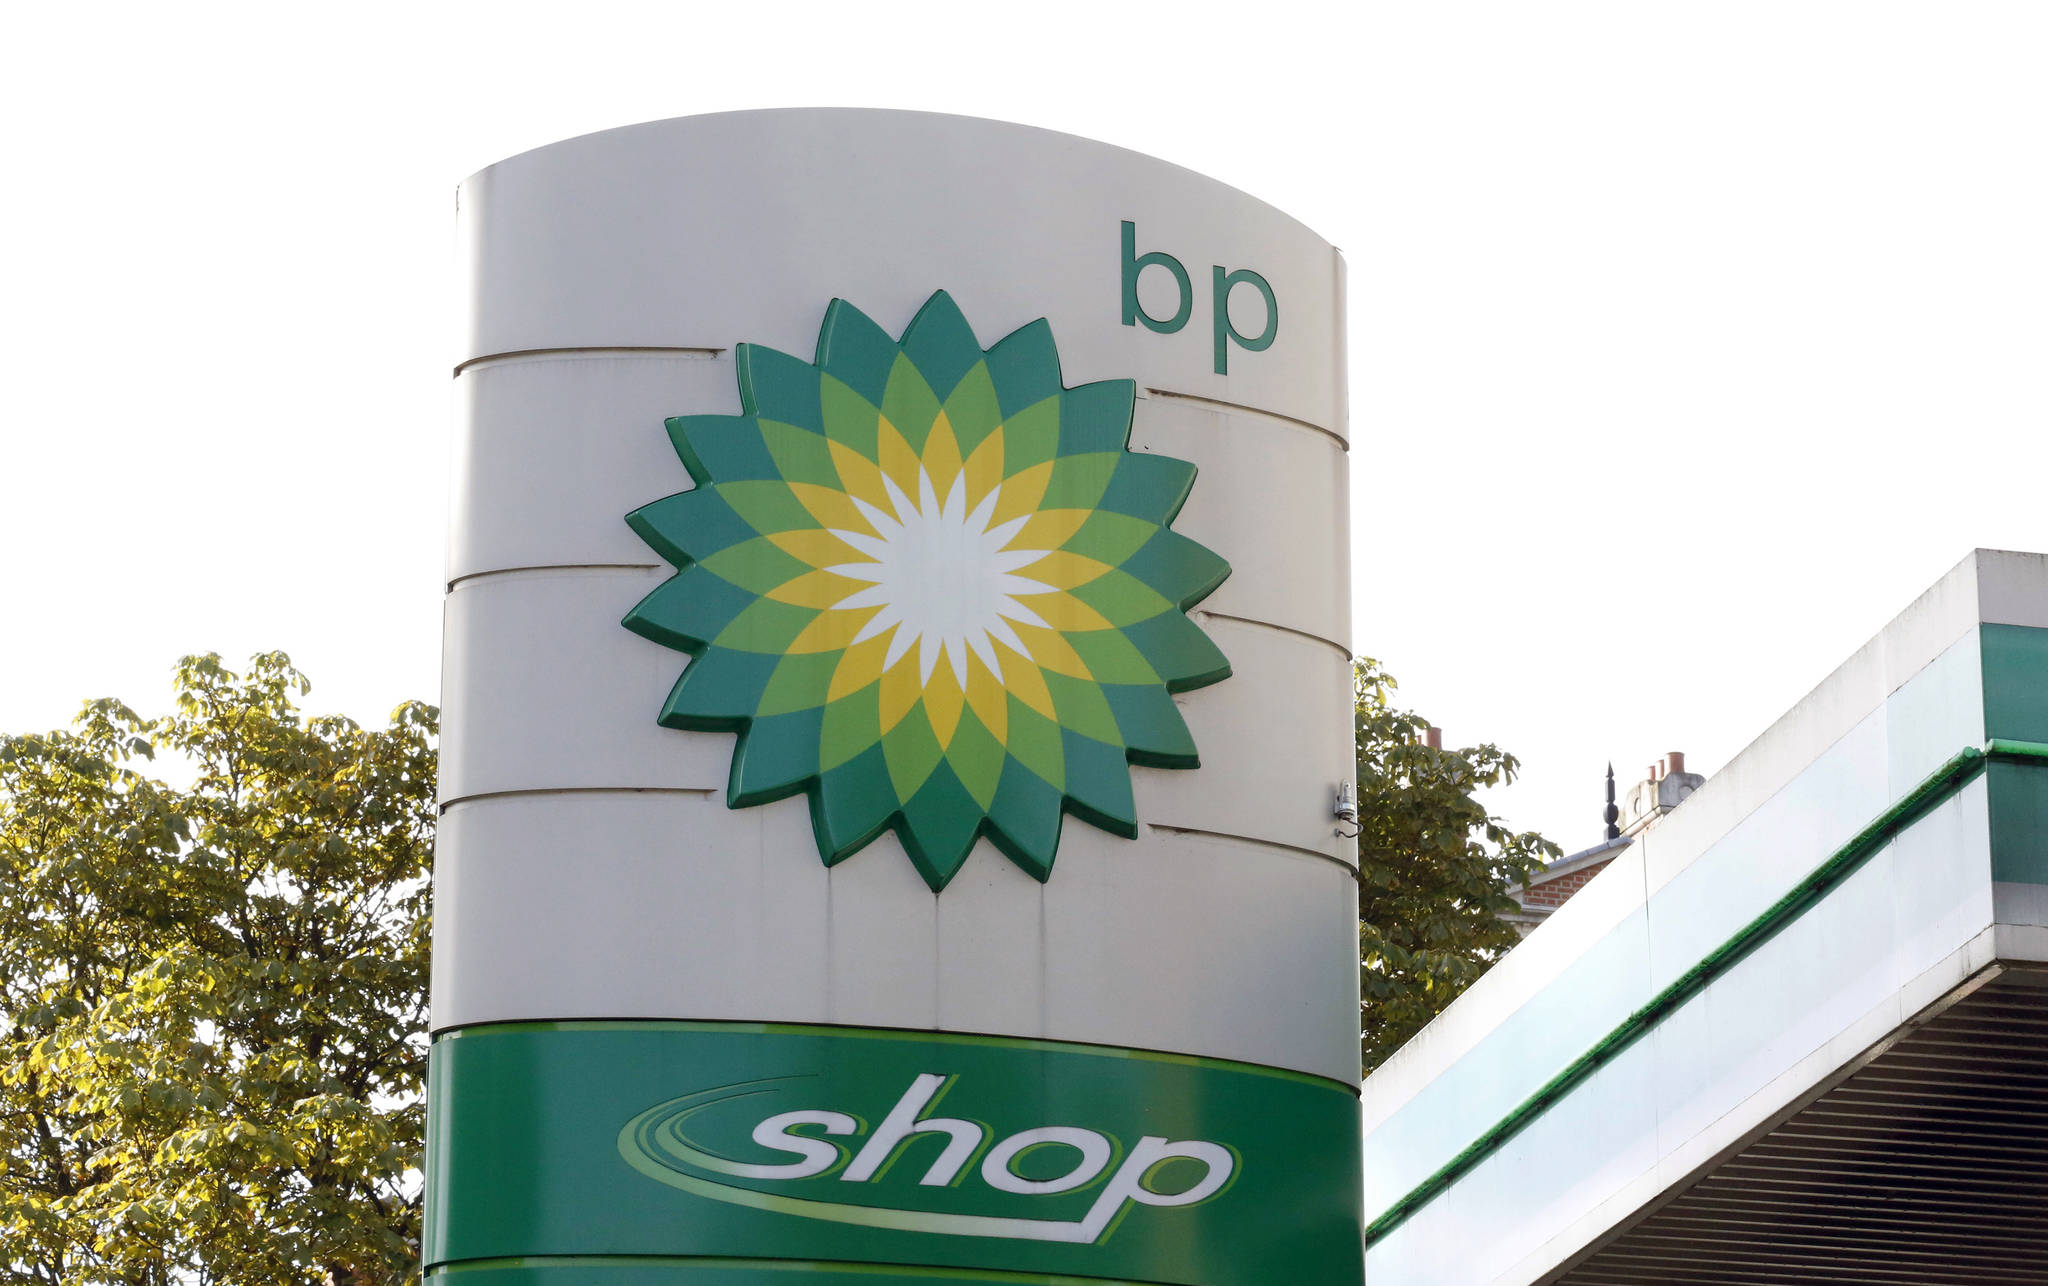 FILE - This Aug. 1, 2017, file photo shows the oil producer BP company logo at a petrol station in London. BP, a major player on Alaska’s North Slope for decades, is selling all of its Alaska assets, the company announced Tuesday, Aug. 27, 2019. Hilcorp Alaska is purchasing BP interests in both the Prudhoe Bay oil field and the trans-Alaska pipeline for $5.6 billion, BP announced in a release.(AP Photo/Caroline Spiezio, File)